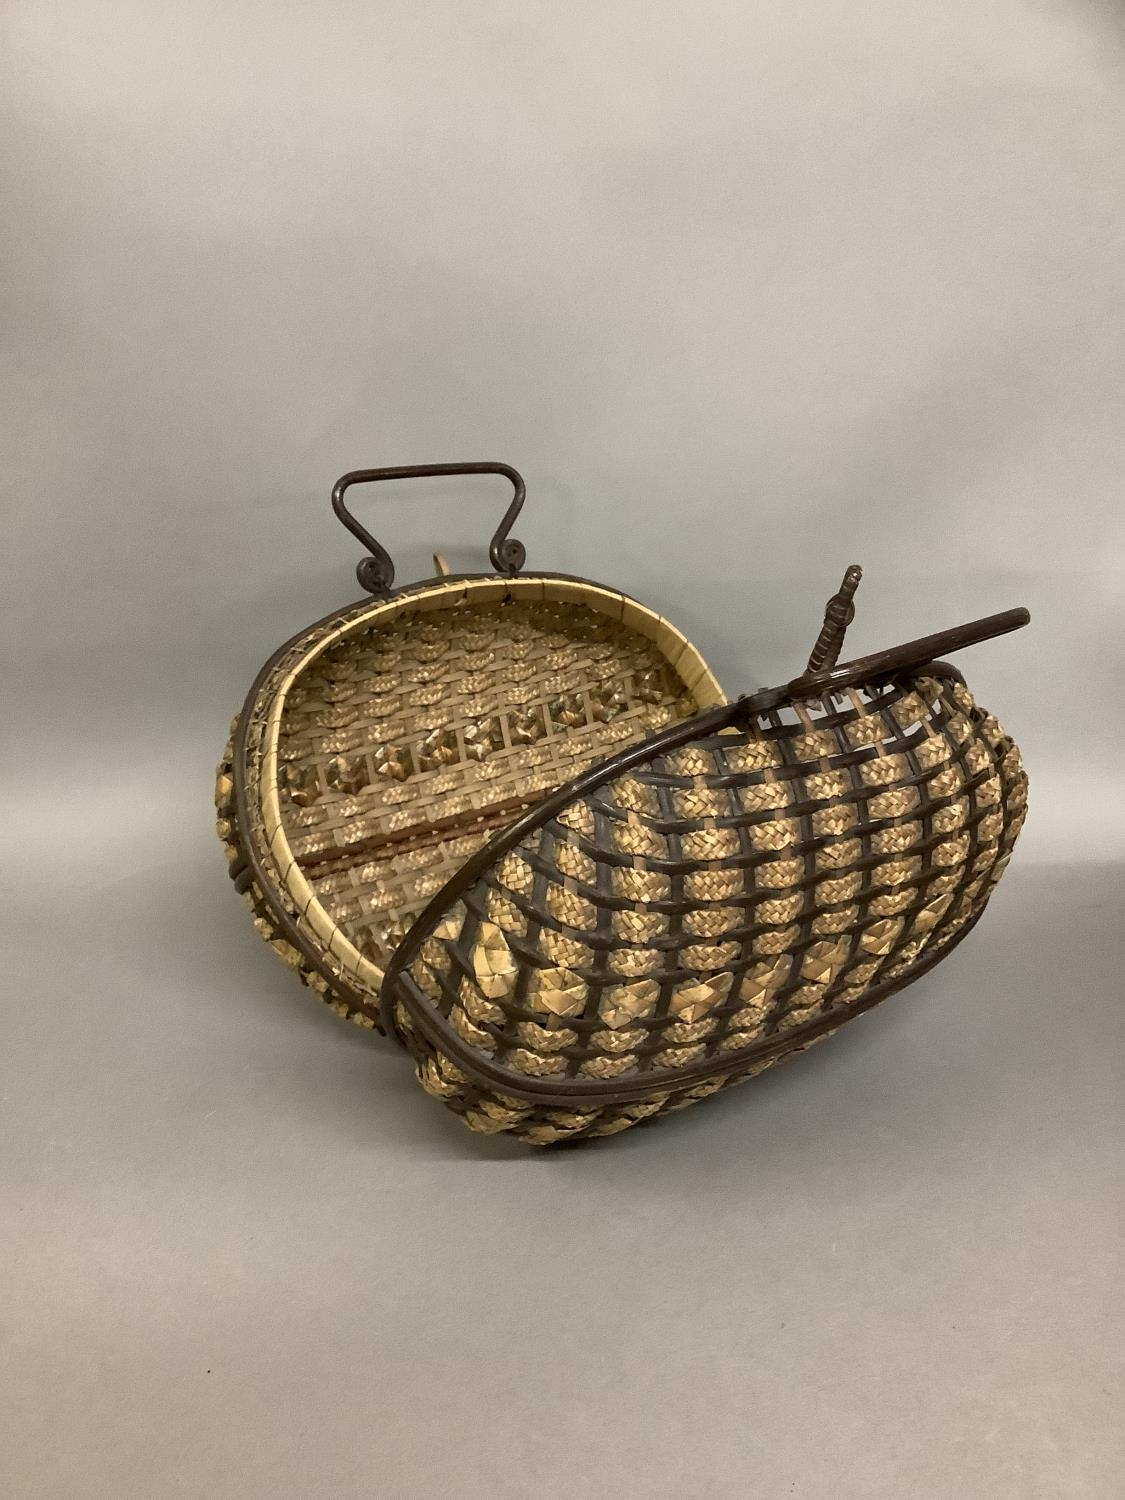 A Victorian lady’s honeycomb basket, in oval form, a work basket for sewing requisites, wood - Image 2 of 3